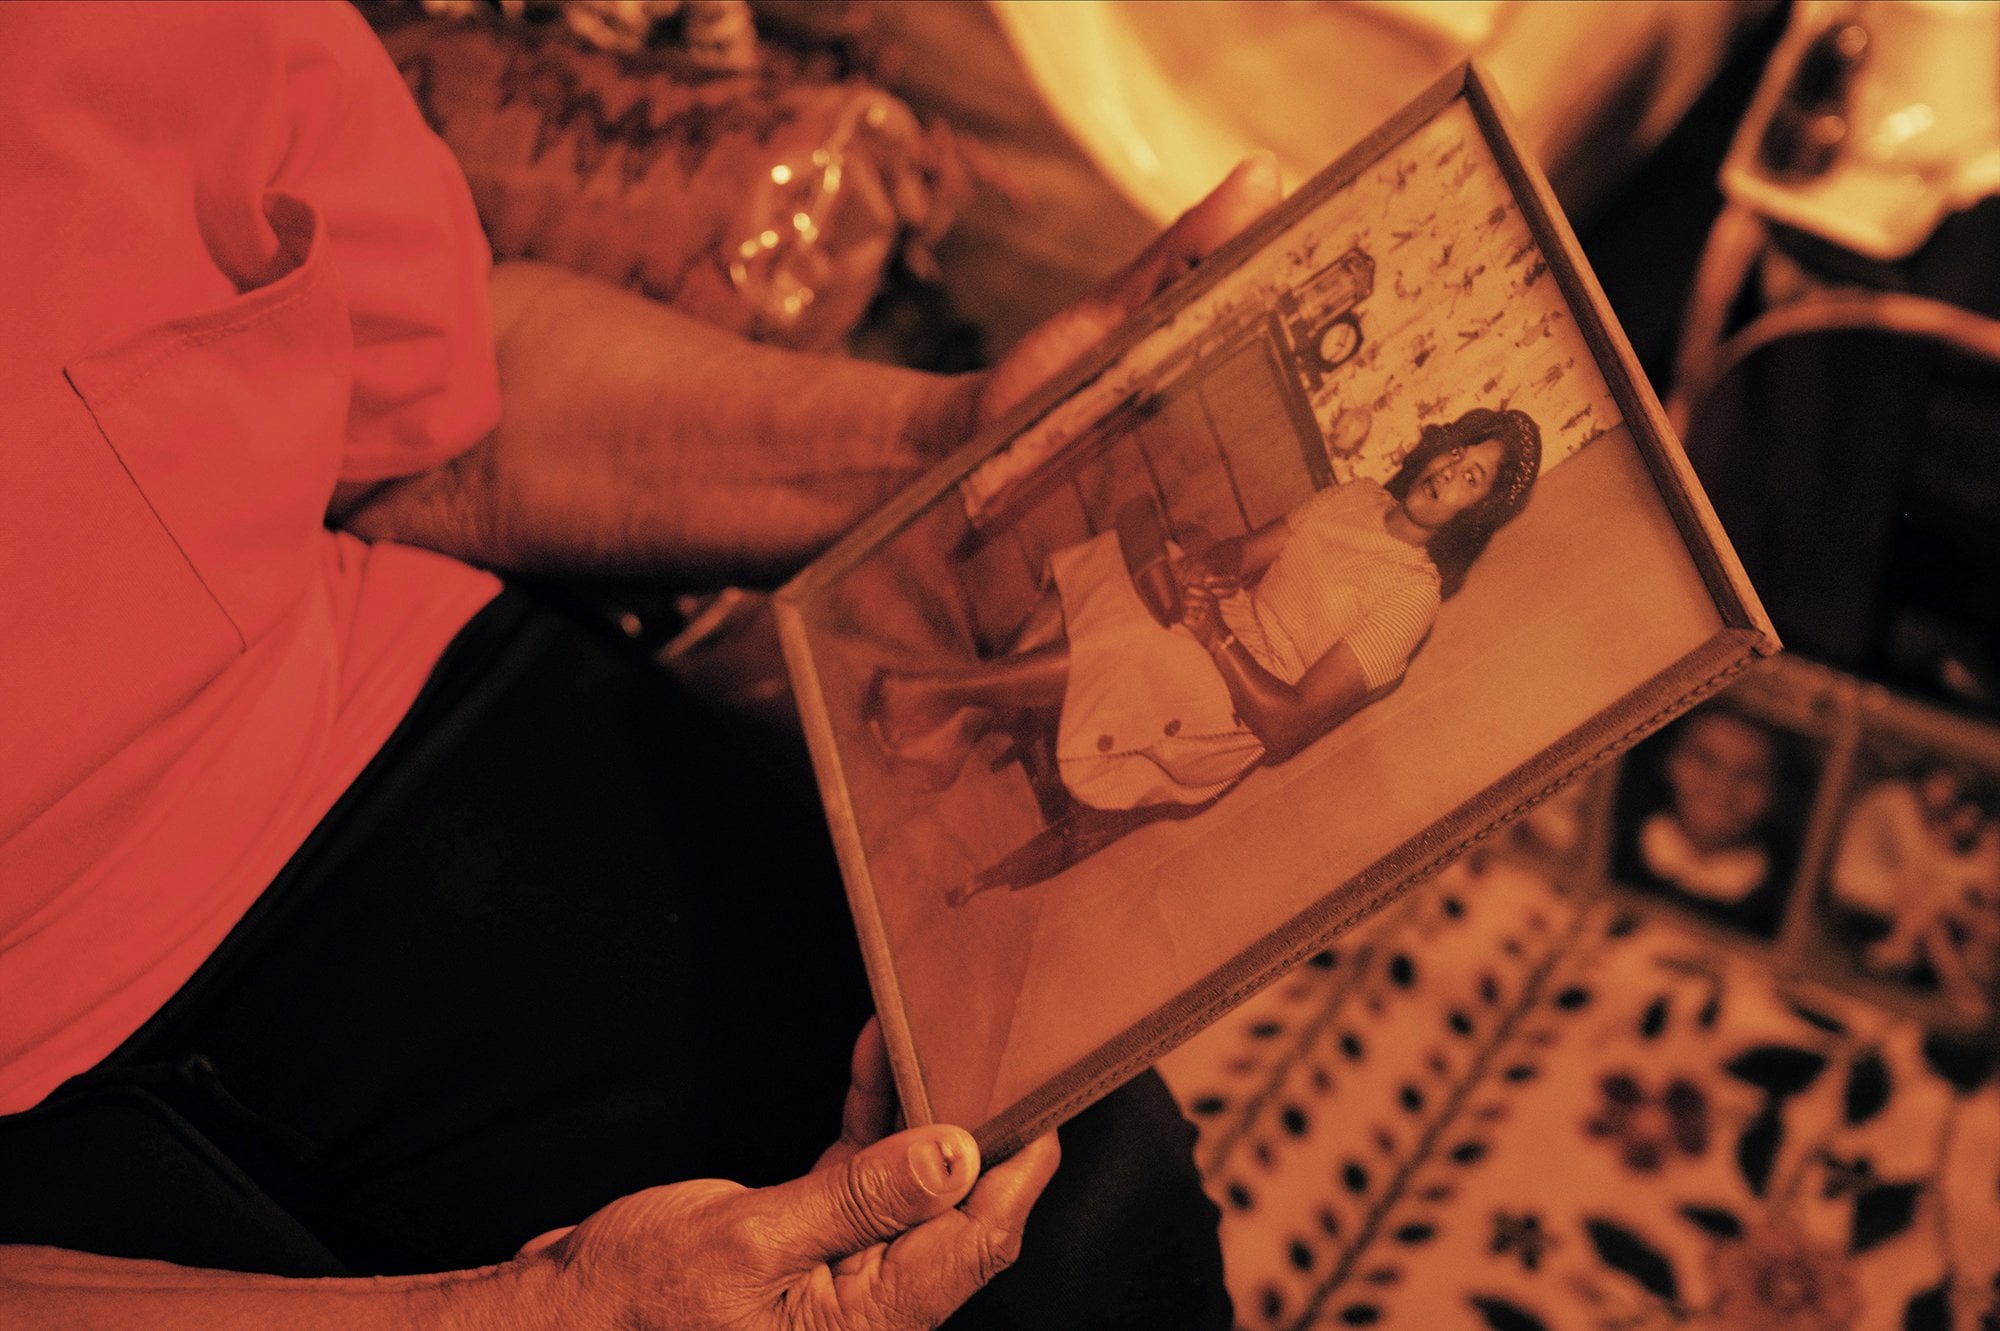 The lady sitting down holding a framed photo of a woman.